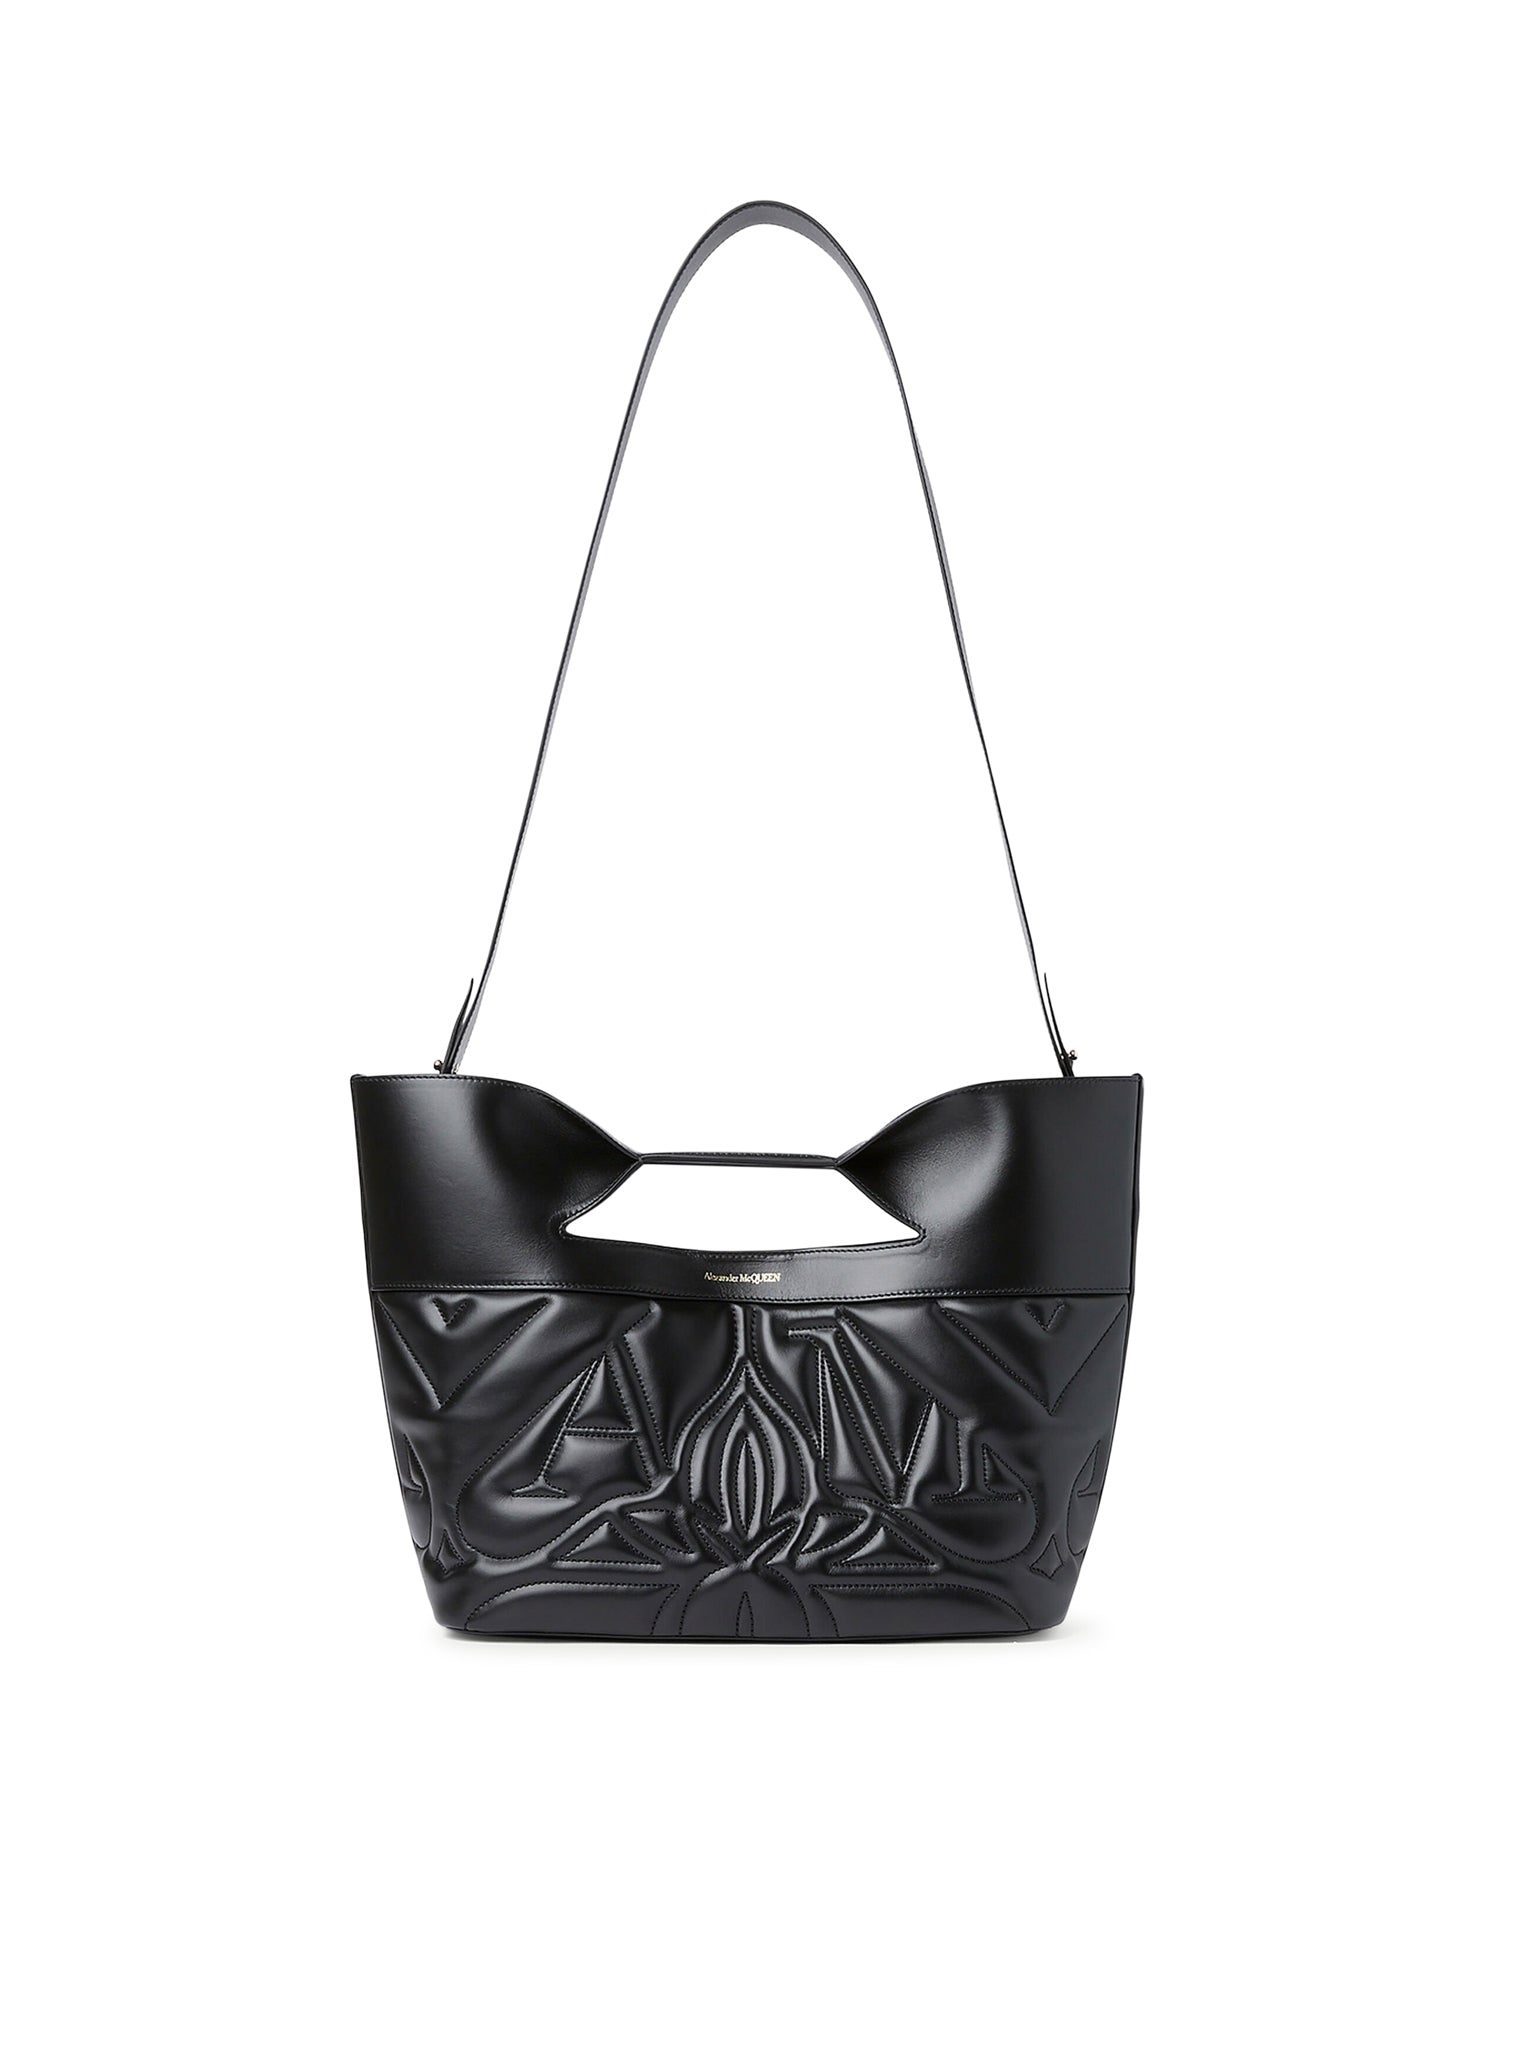 The Bow Small Bag for Women